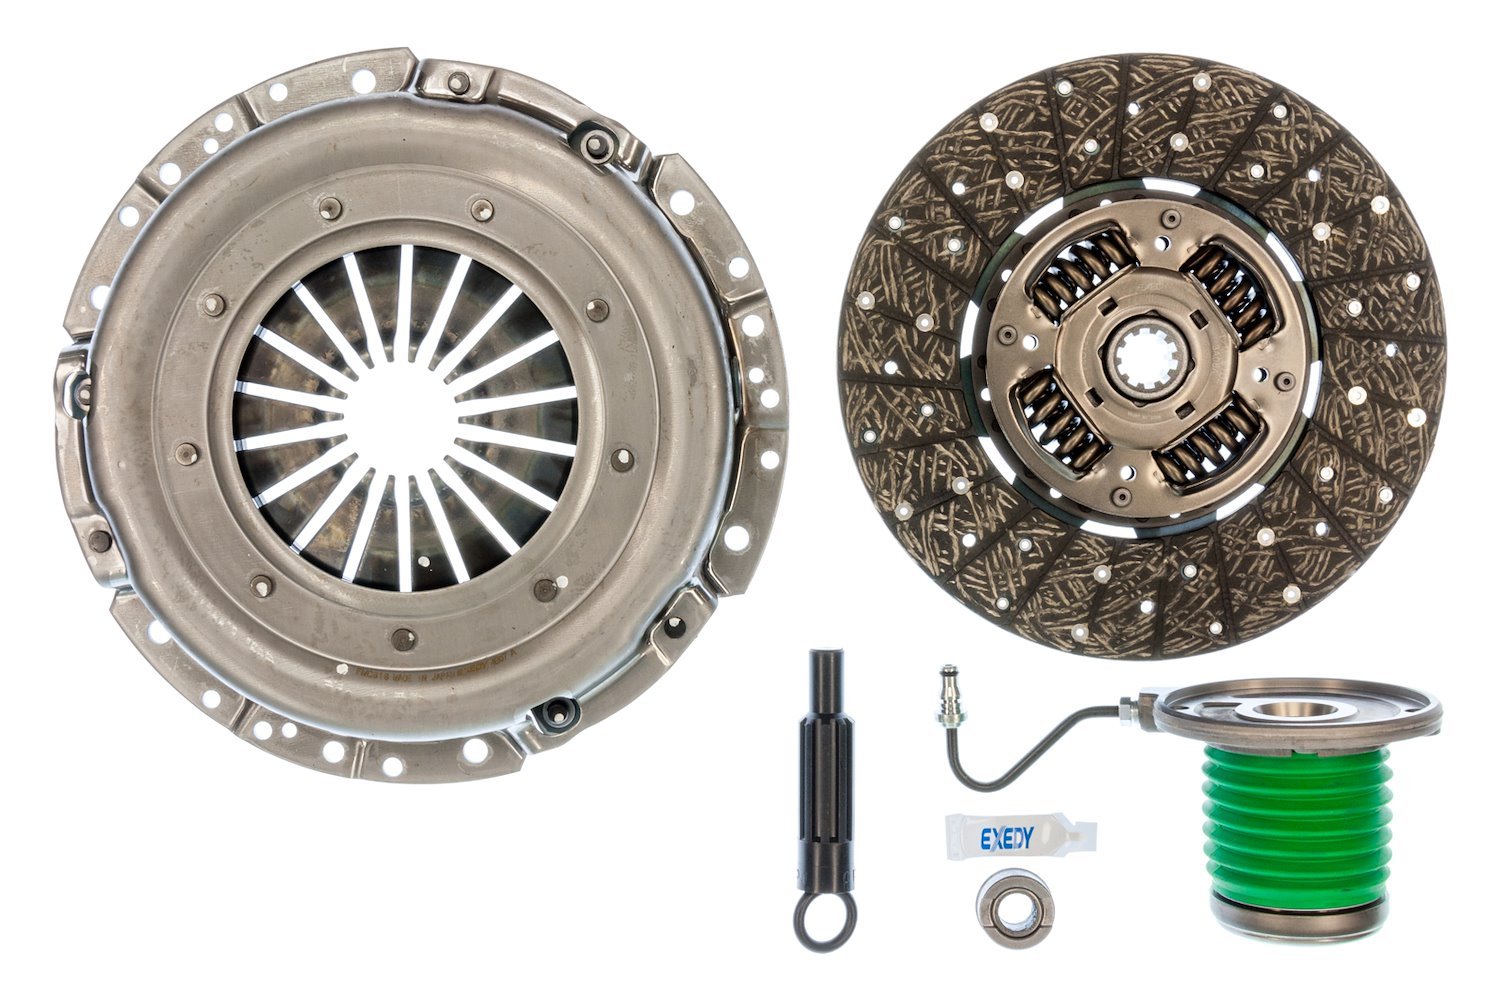 FMK1011 OEM Replacement Transmission Clutch Kit, 2005-2008 Ford Mustang V8